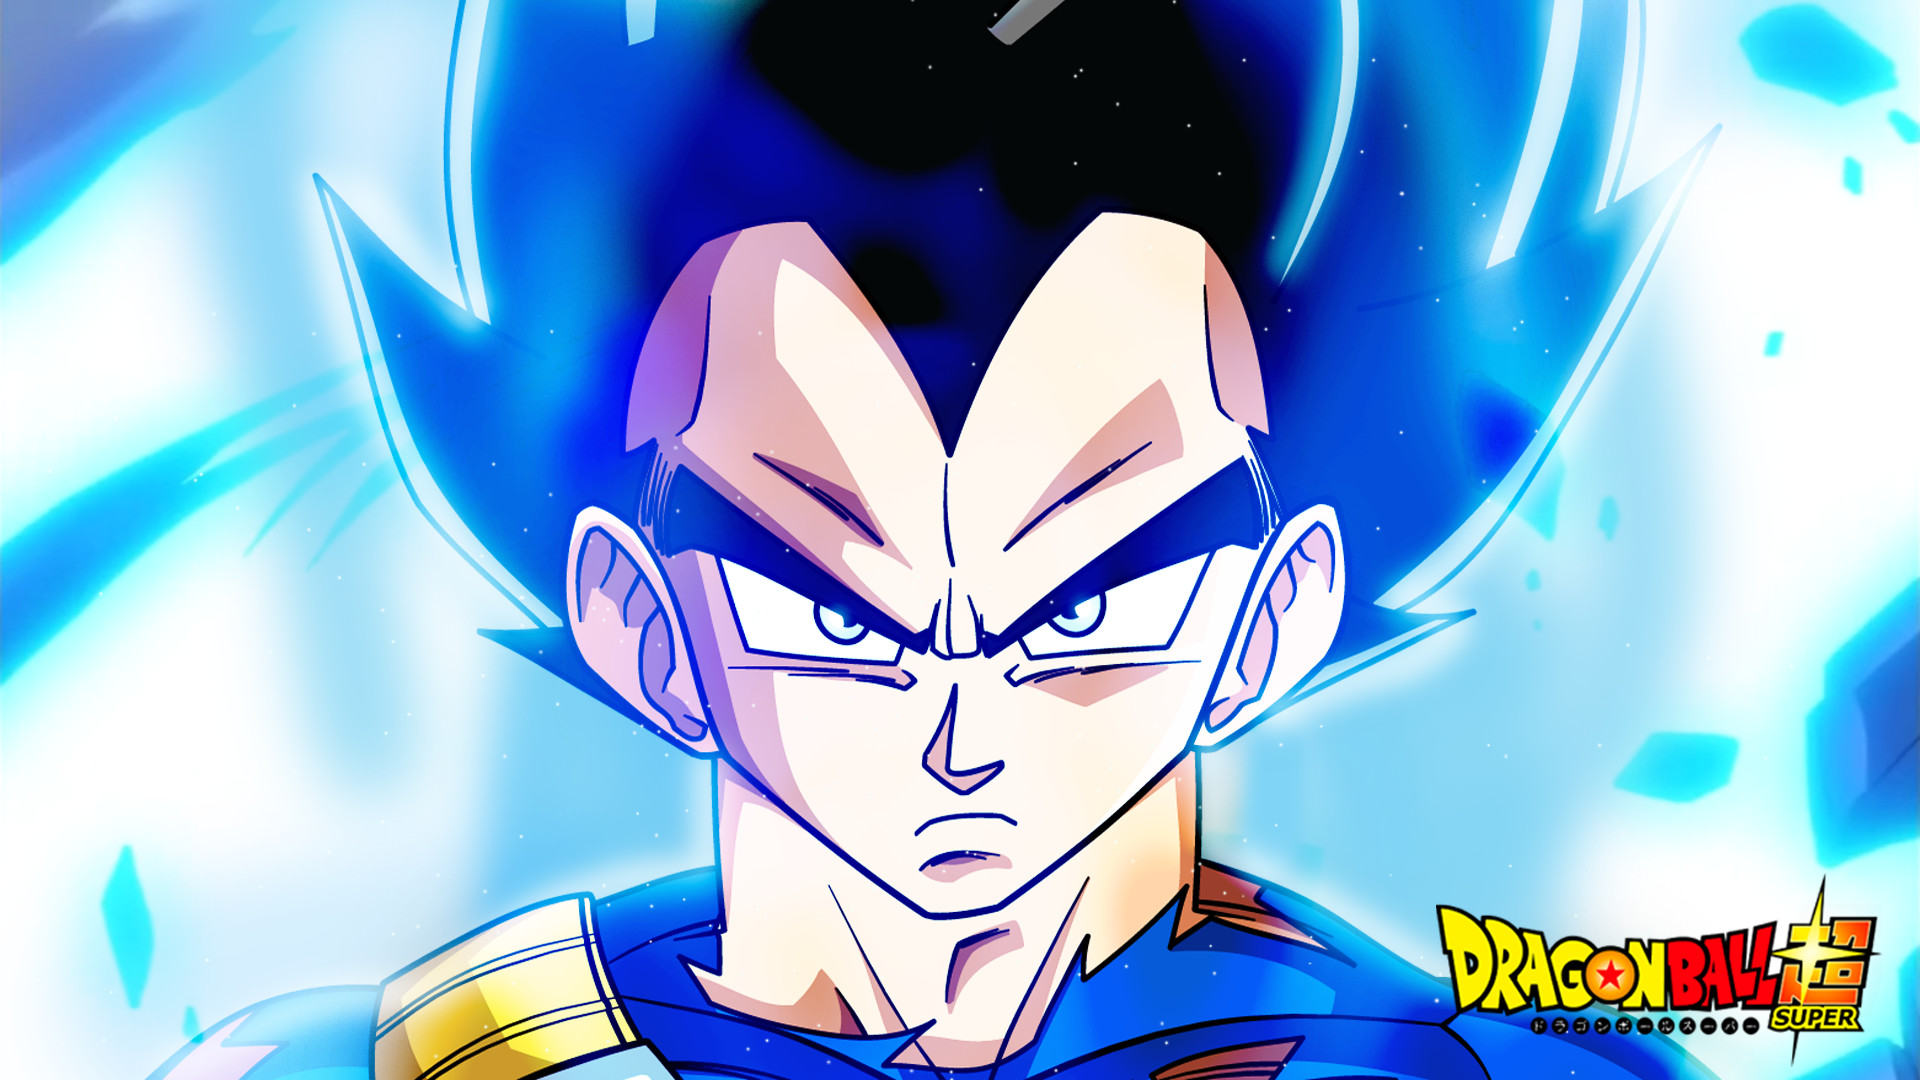 Vegeta Wallpaper for Android (76+ images)